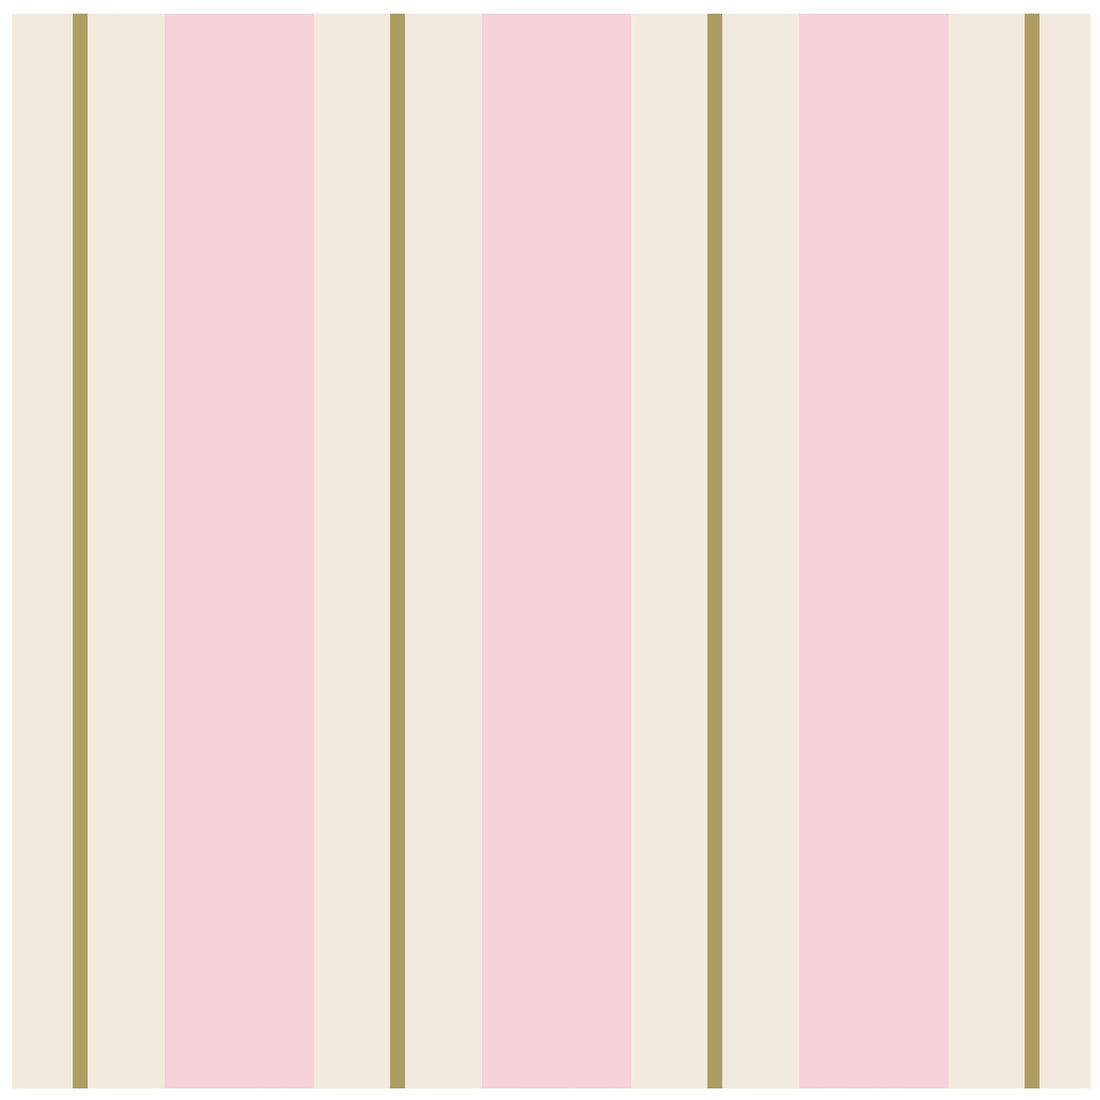 A square cocktail napkin featuring vertical pink and white stripes, with a gold line running down the center of each white stripe.